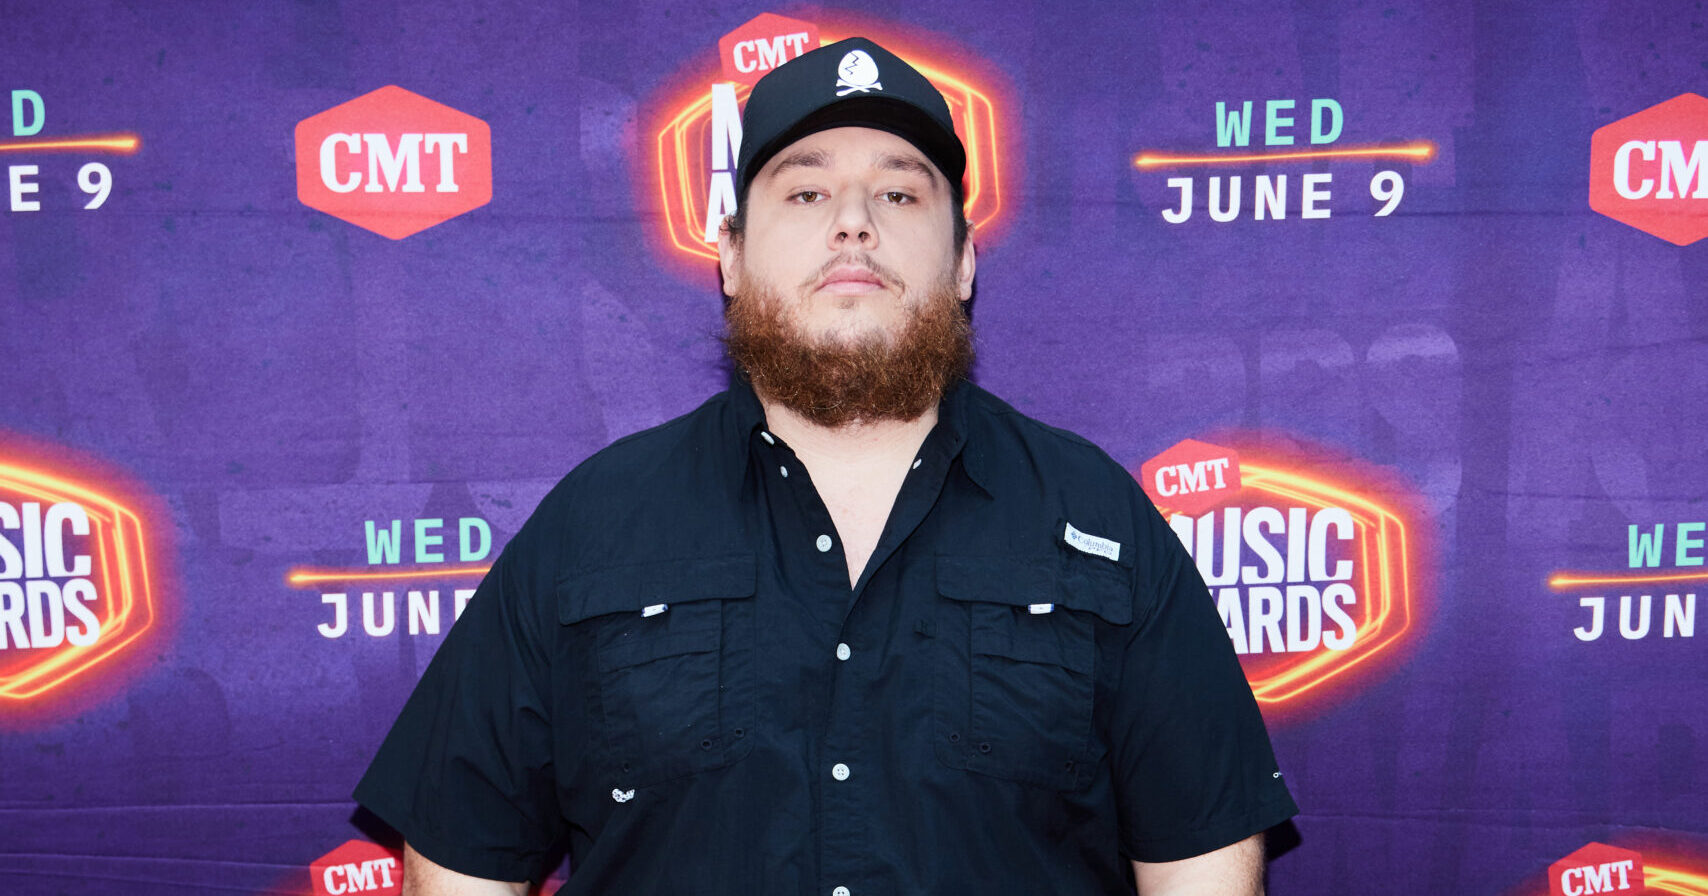 Luke Combs Served Up a Hot Performance of “Cold as You” at the 2021 CMT Music Awards (Watch)